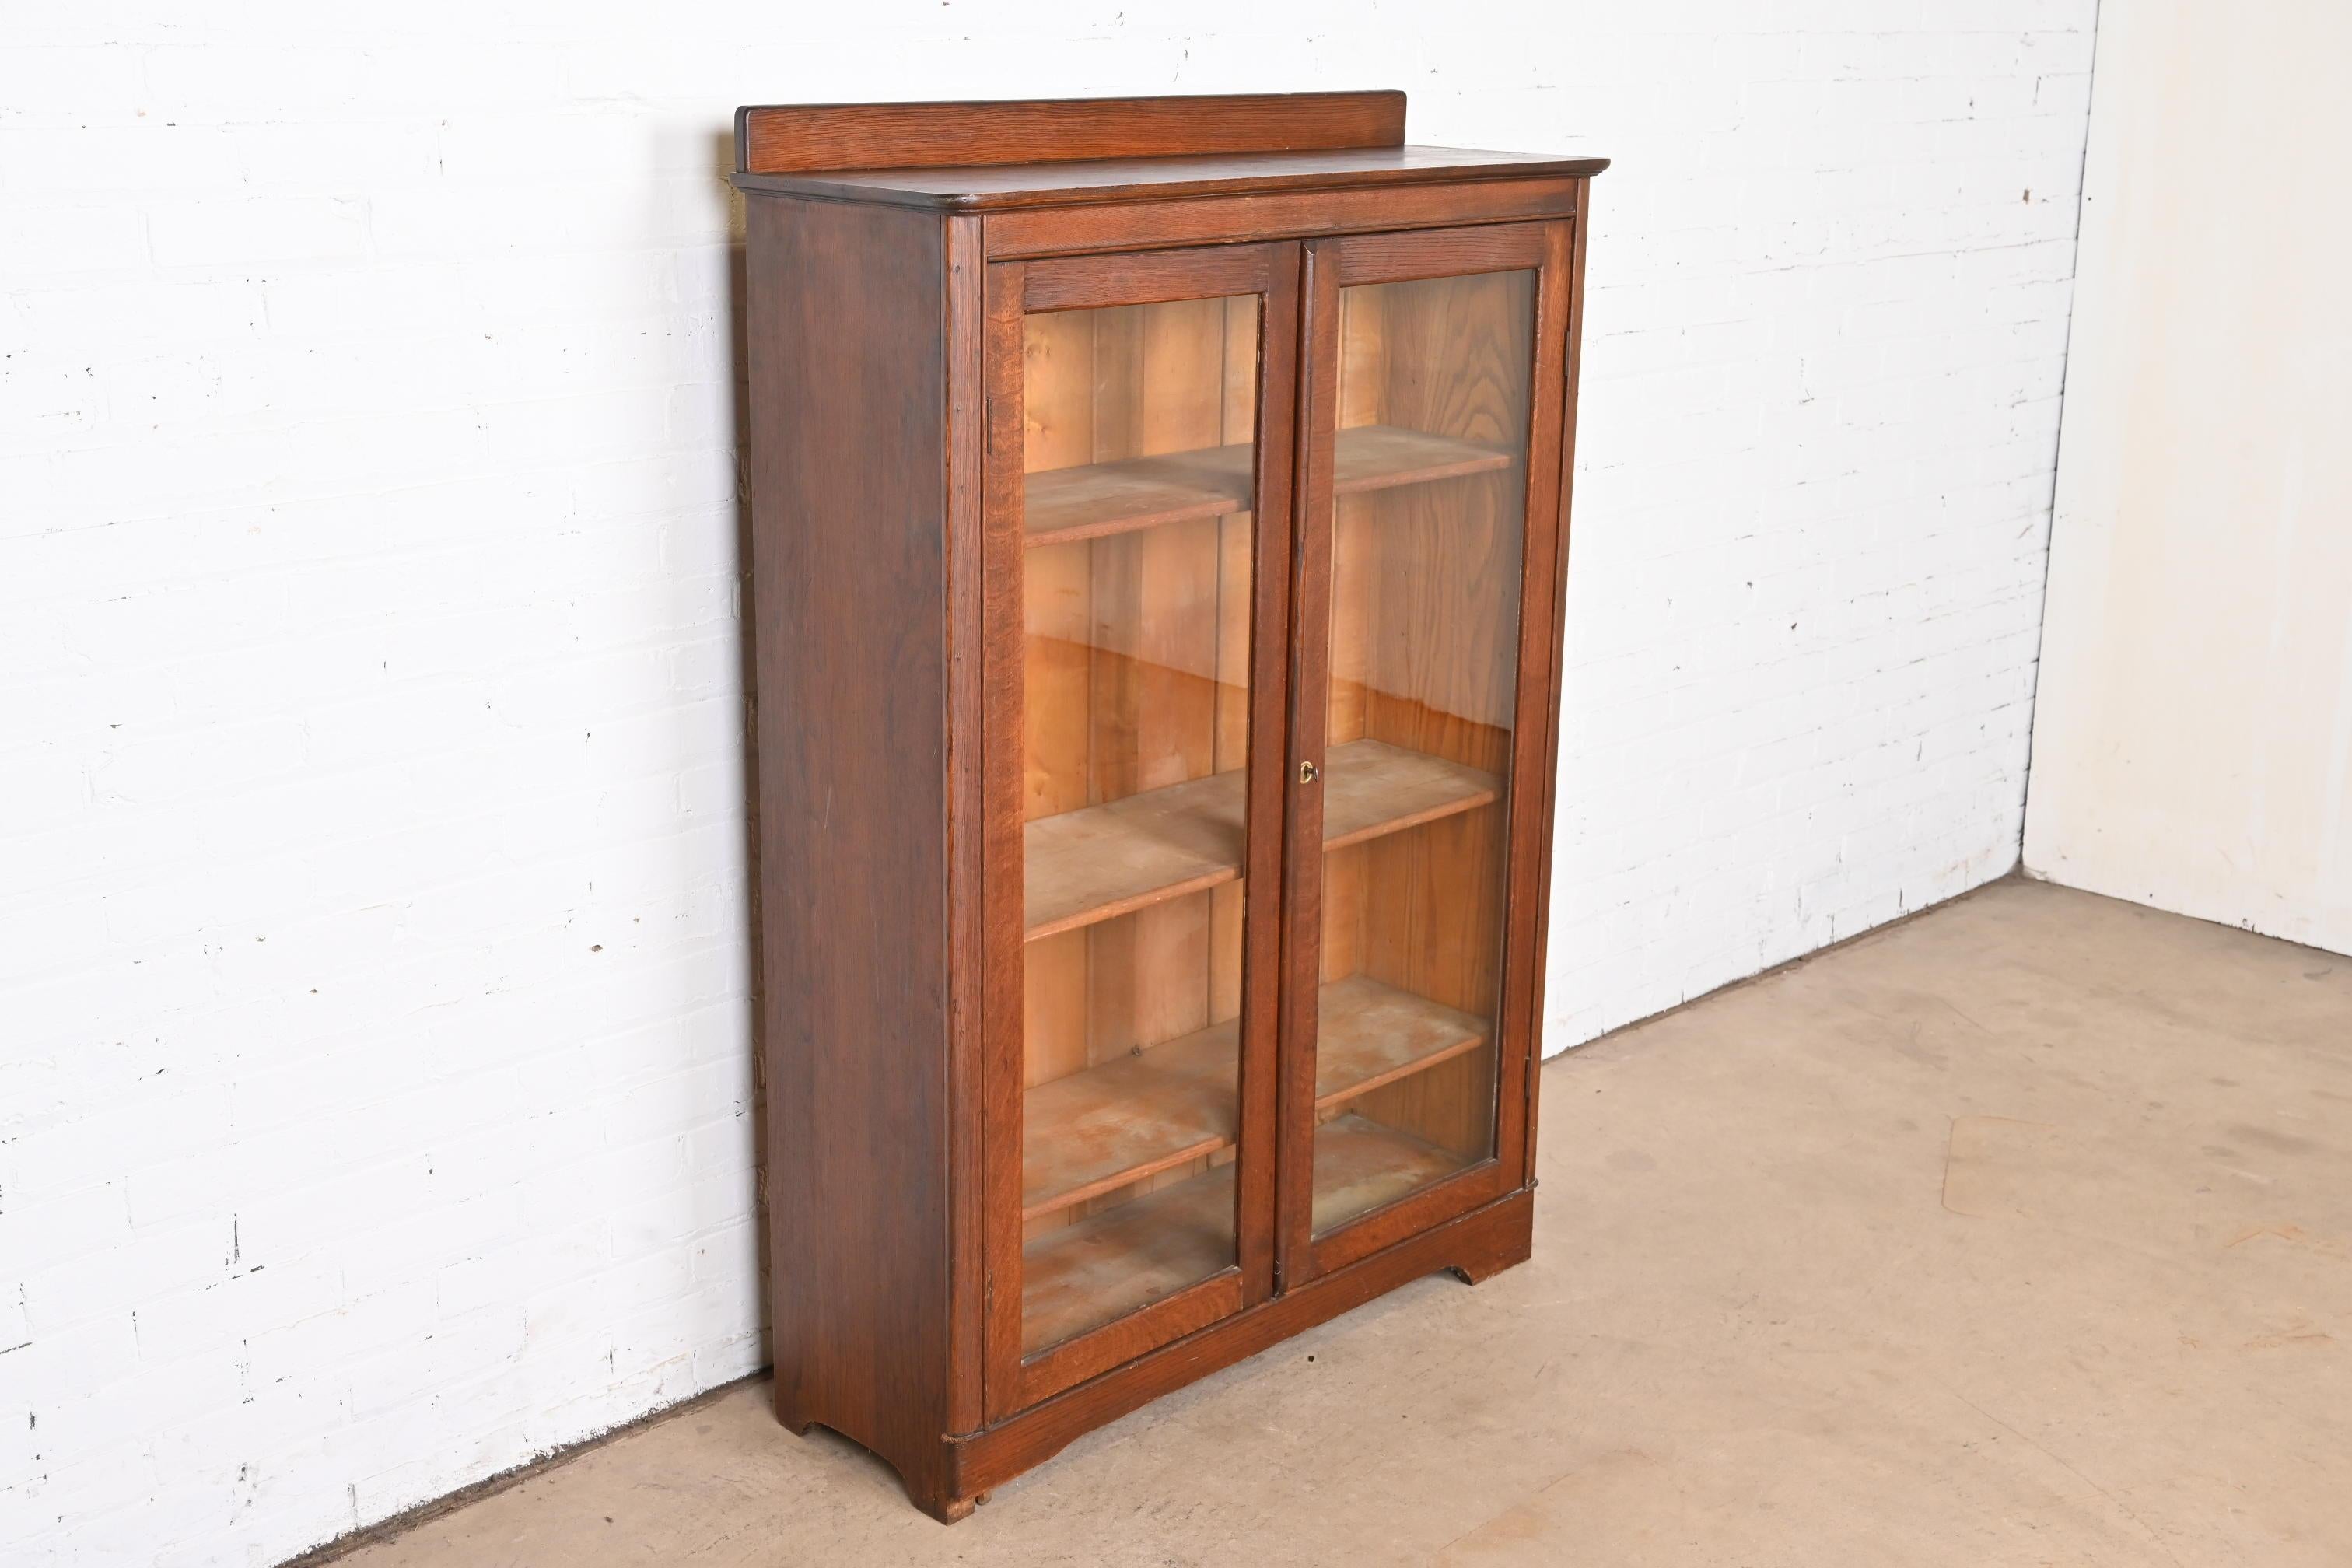 American Antique Arts & Crafts Glass Front Bookcase by Larkin Co., Circa 1900 For Sale